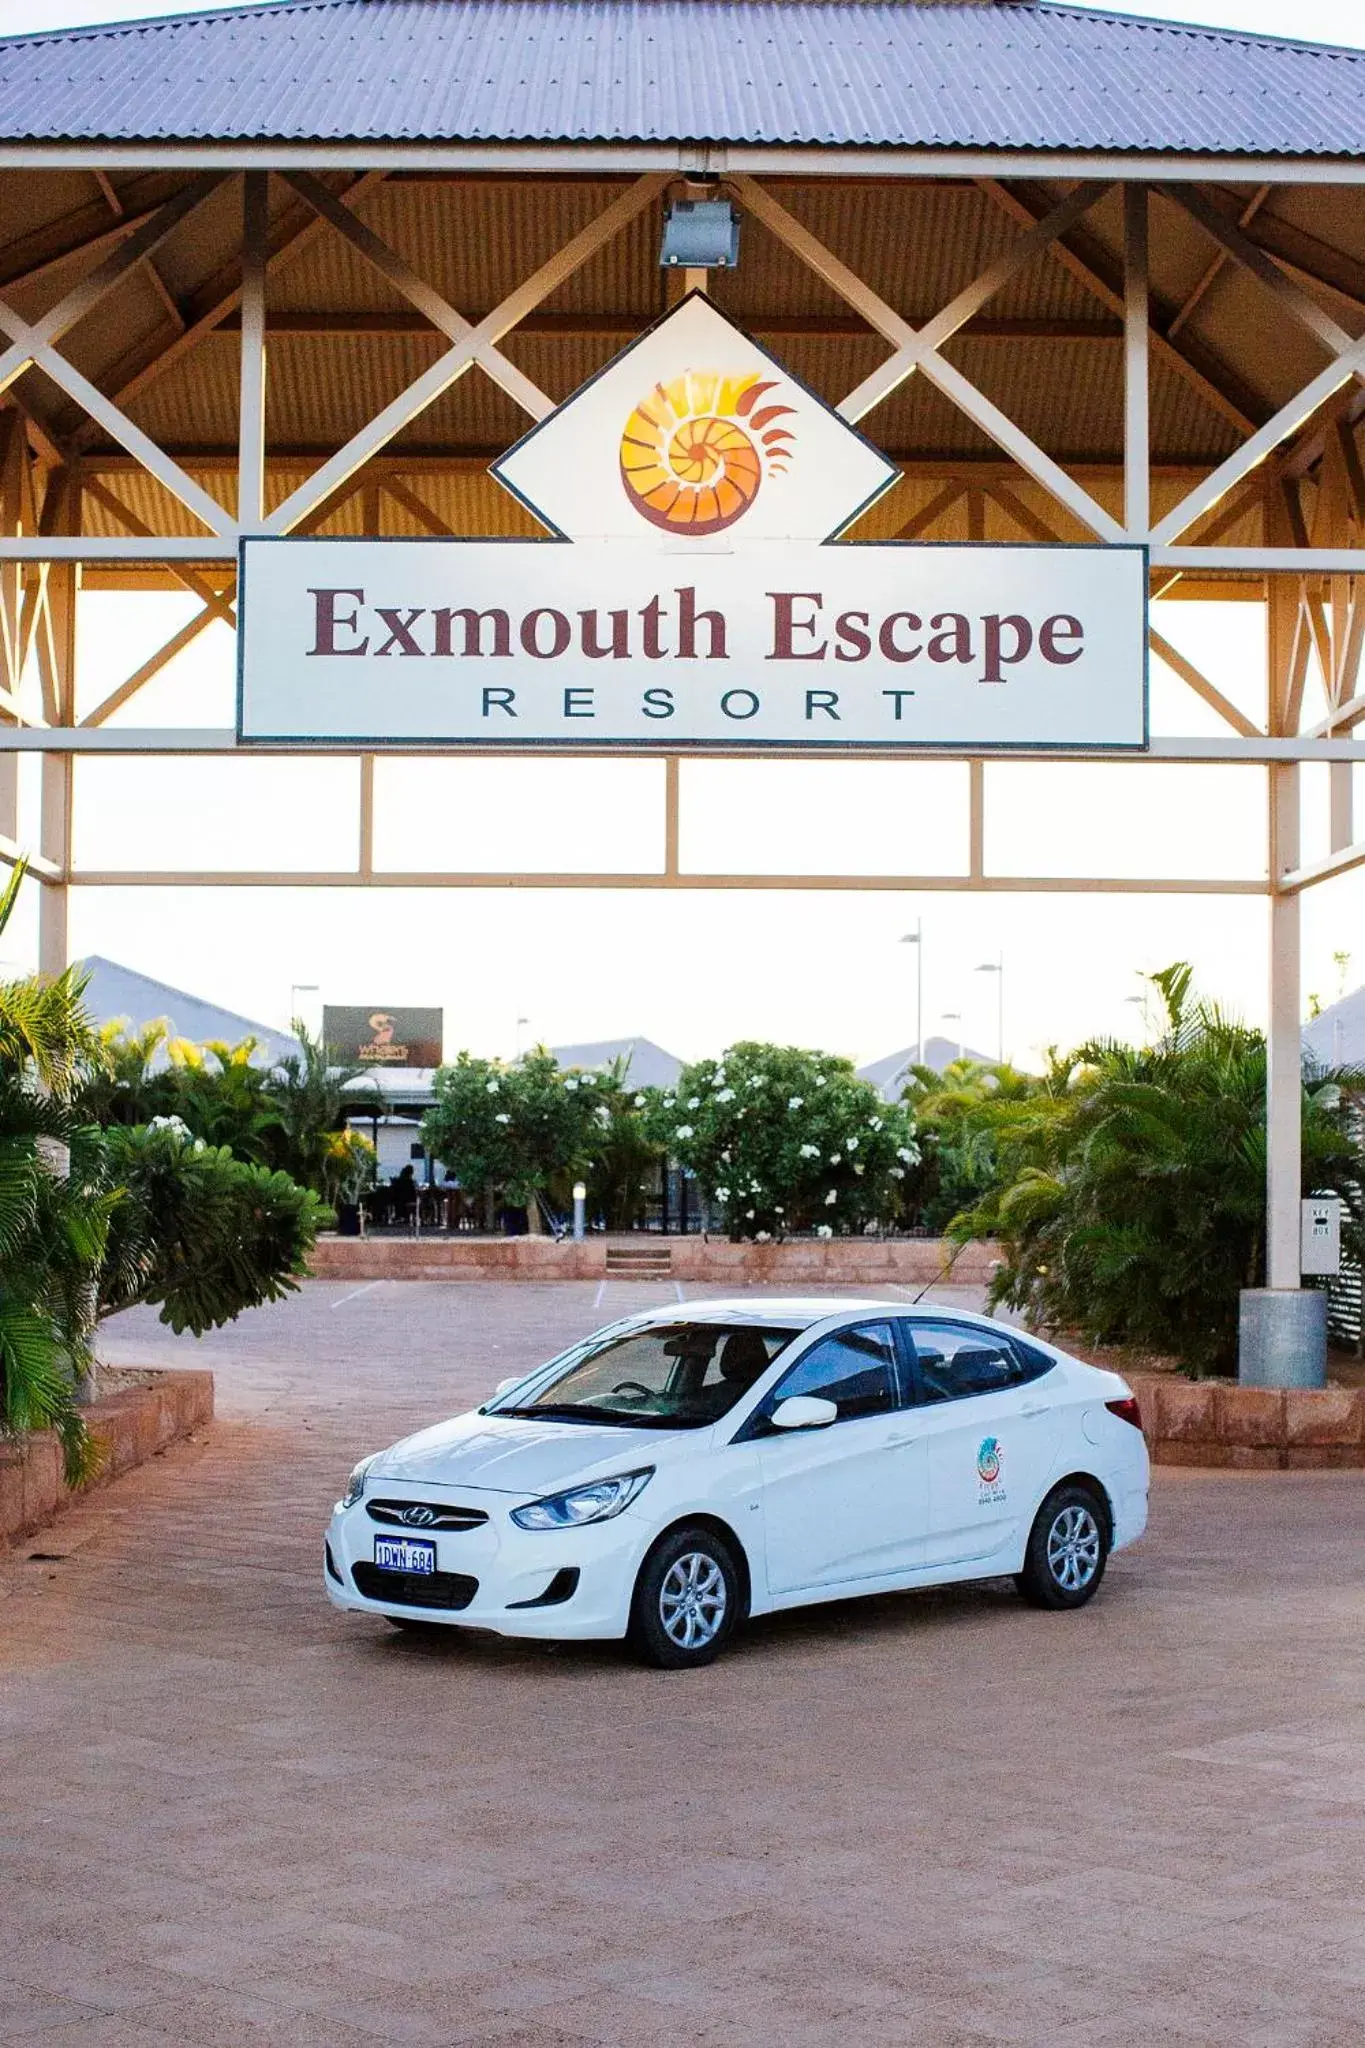 Property Building in Exmouth Escape Resort